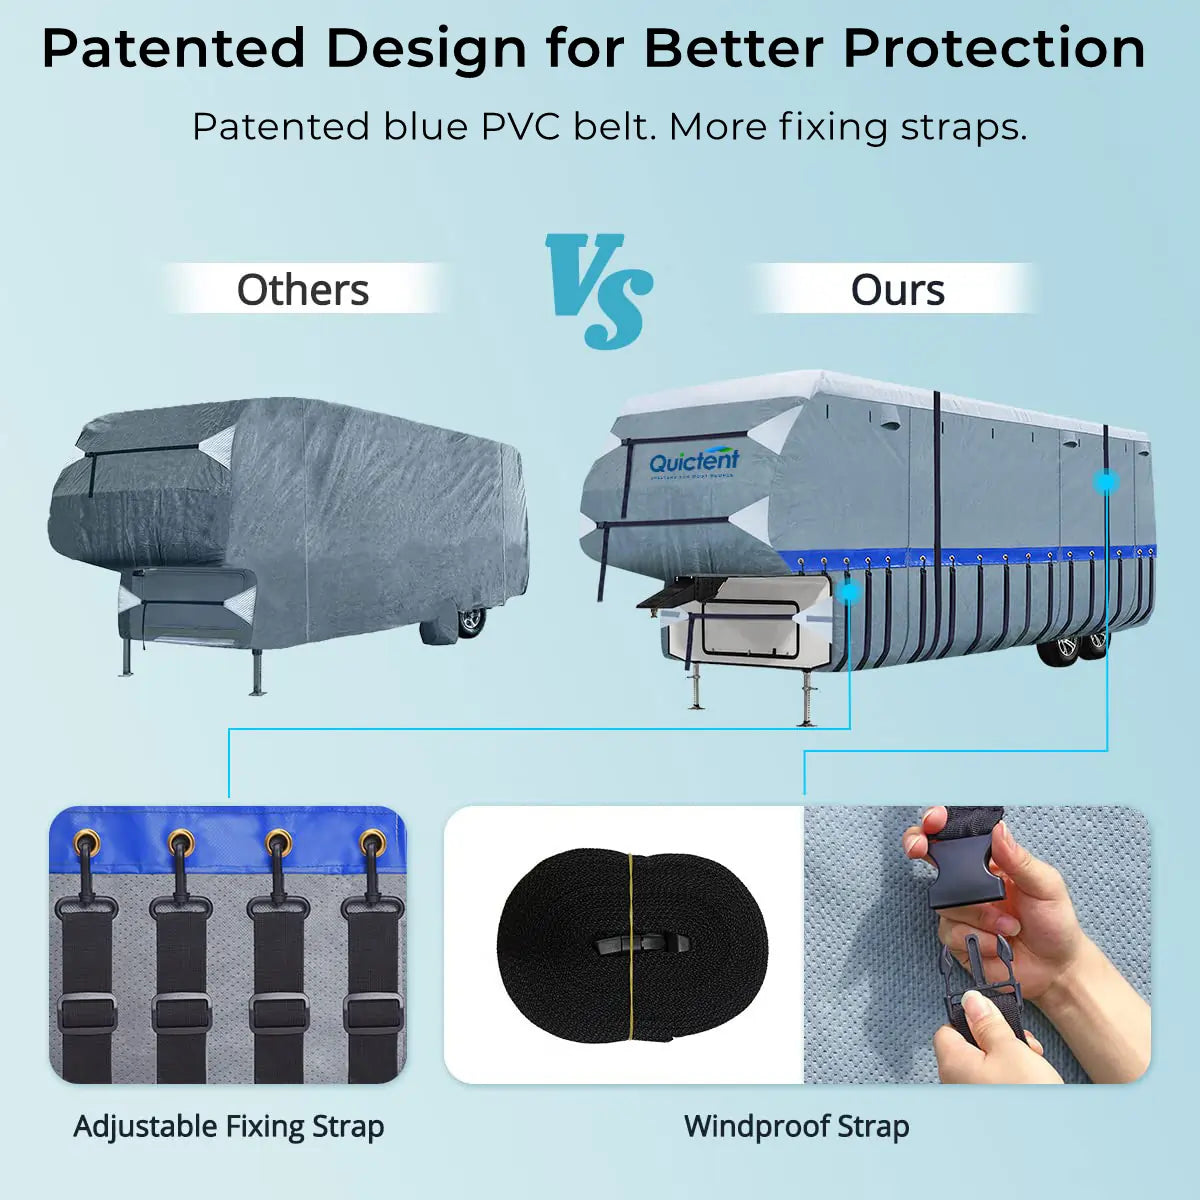 5th Wheel RV Covers Patented Design for Better Protection